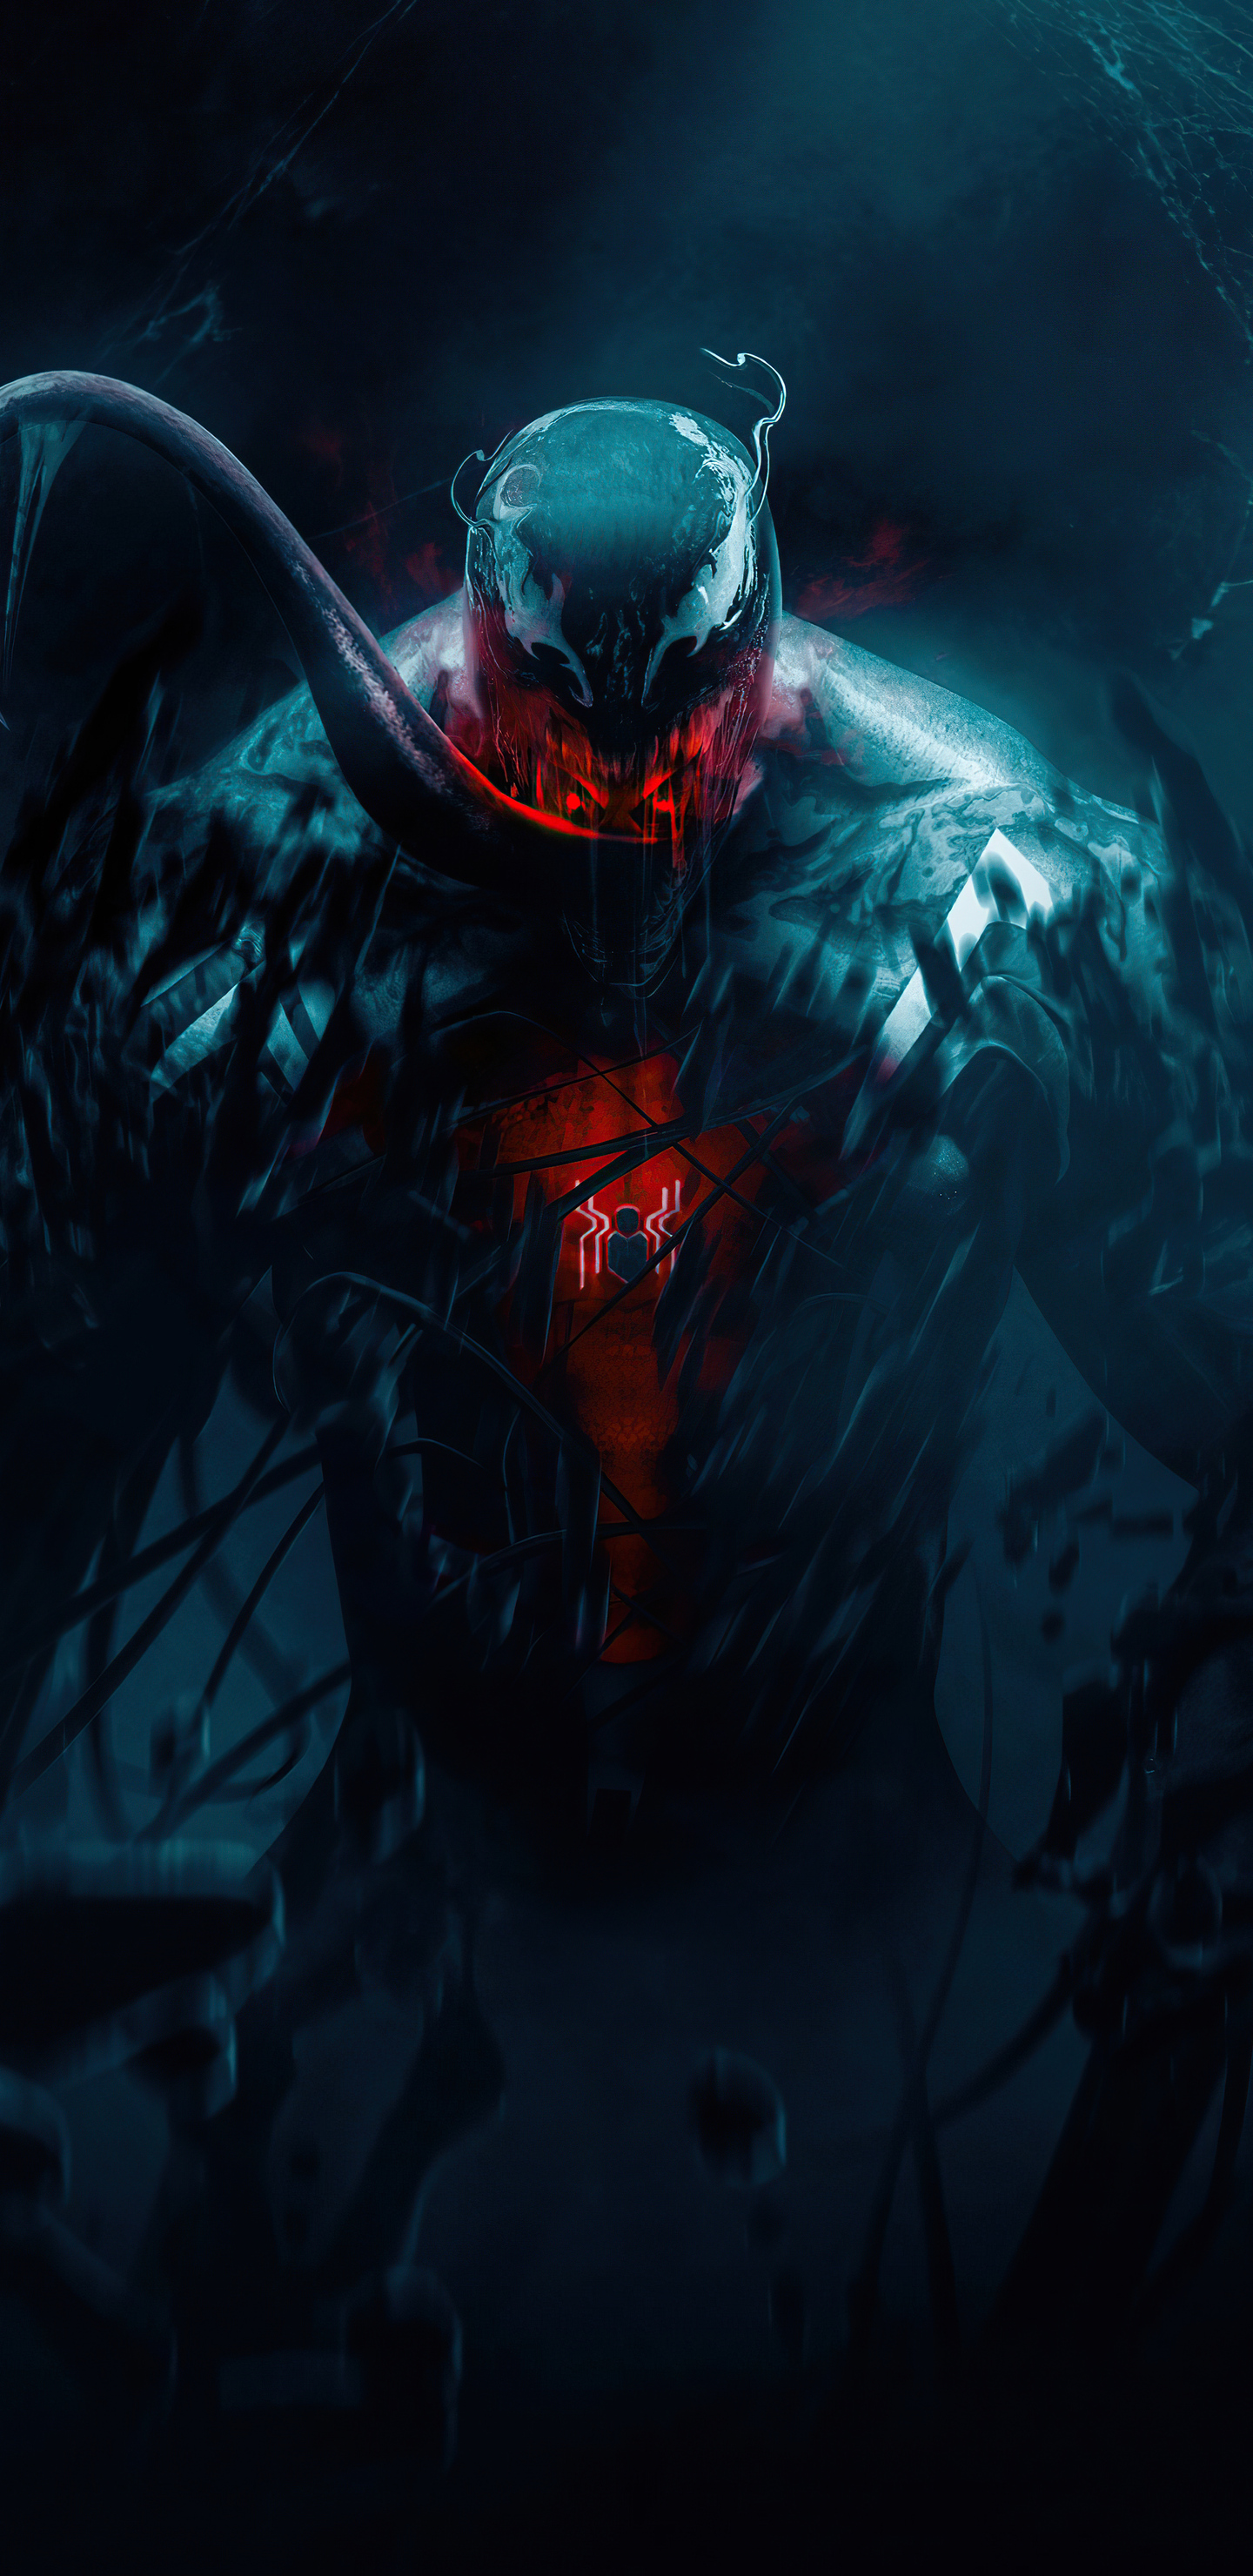 1440x2960 Spider Man X Venom 5k Samsung Galaxy Note 9,8, S9,S8,S8+ QHD HD  4k Wallpapers, Images, Backgrounds, Photos and Pictures